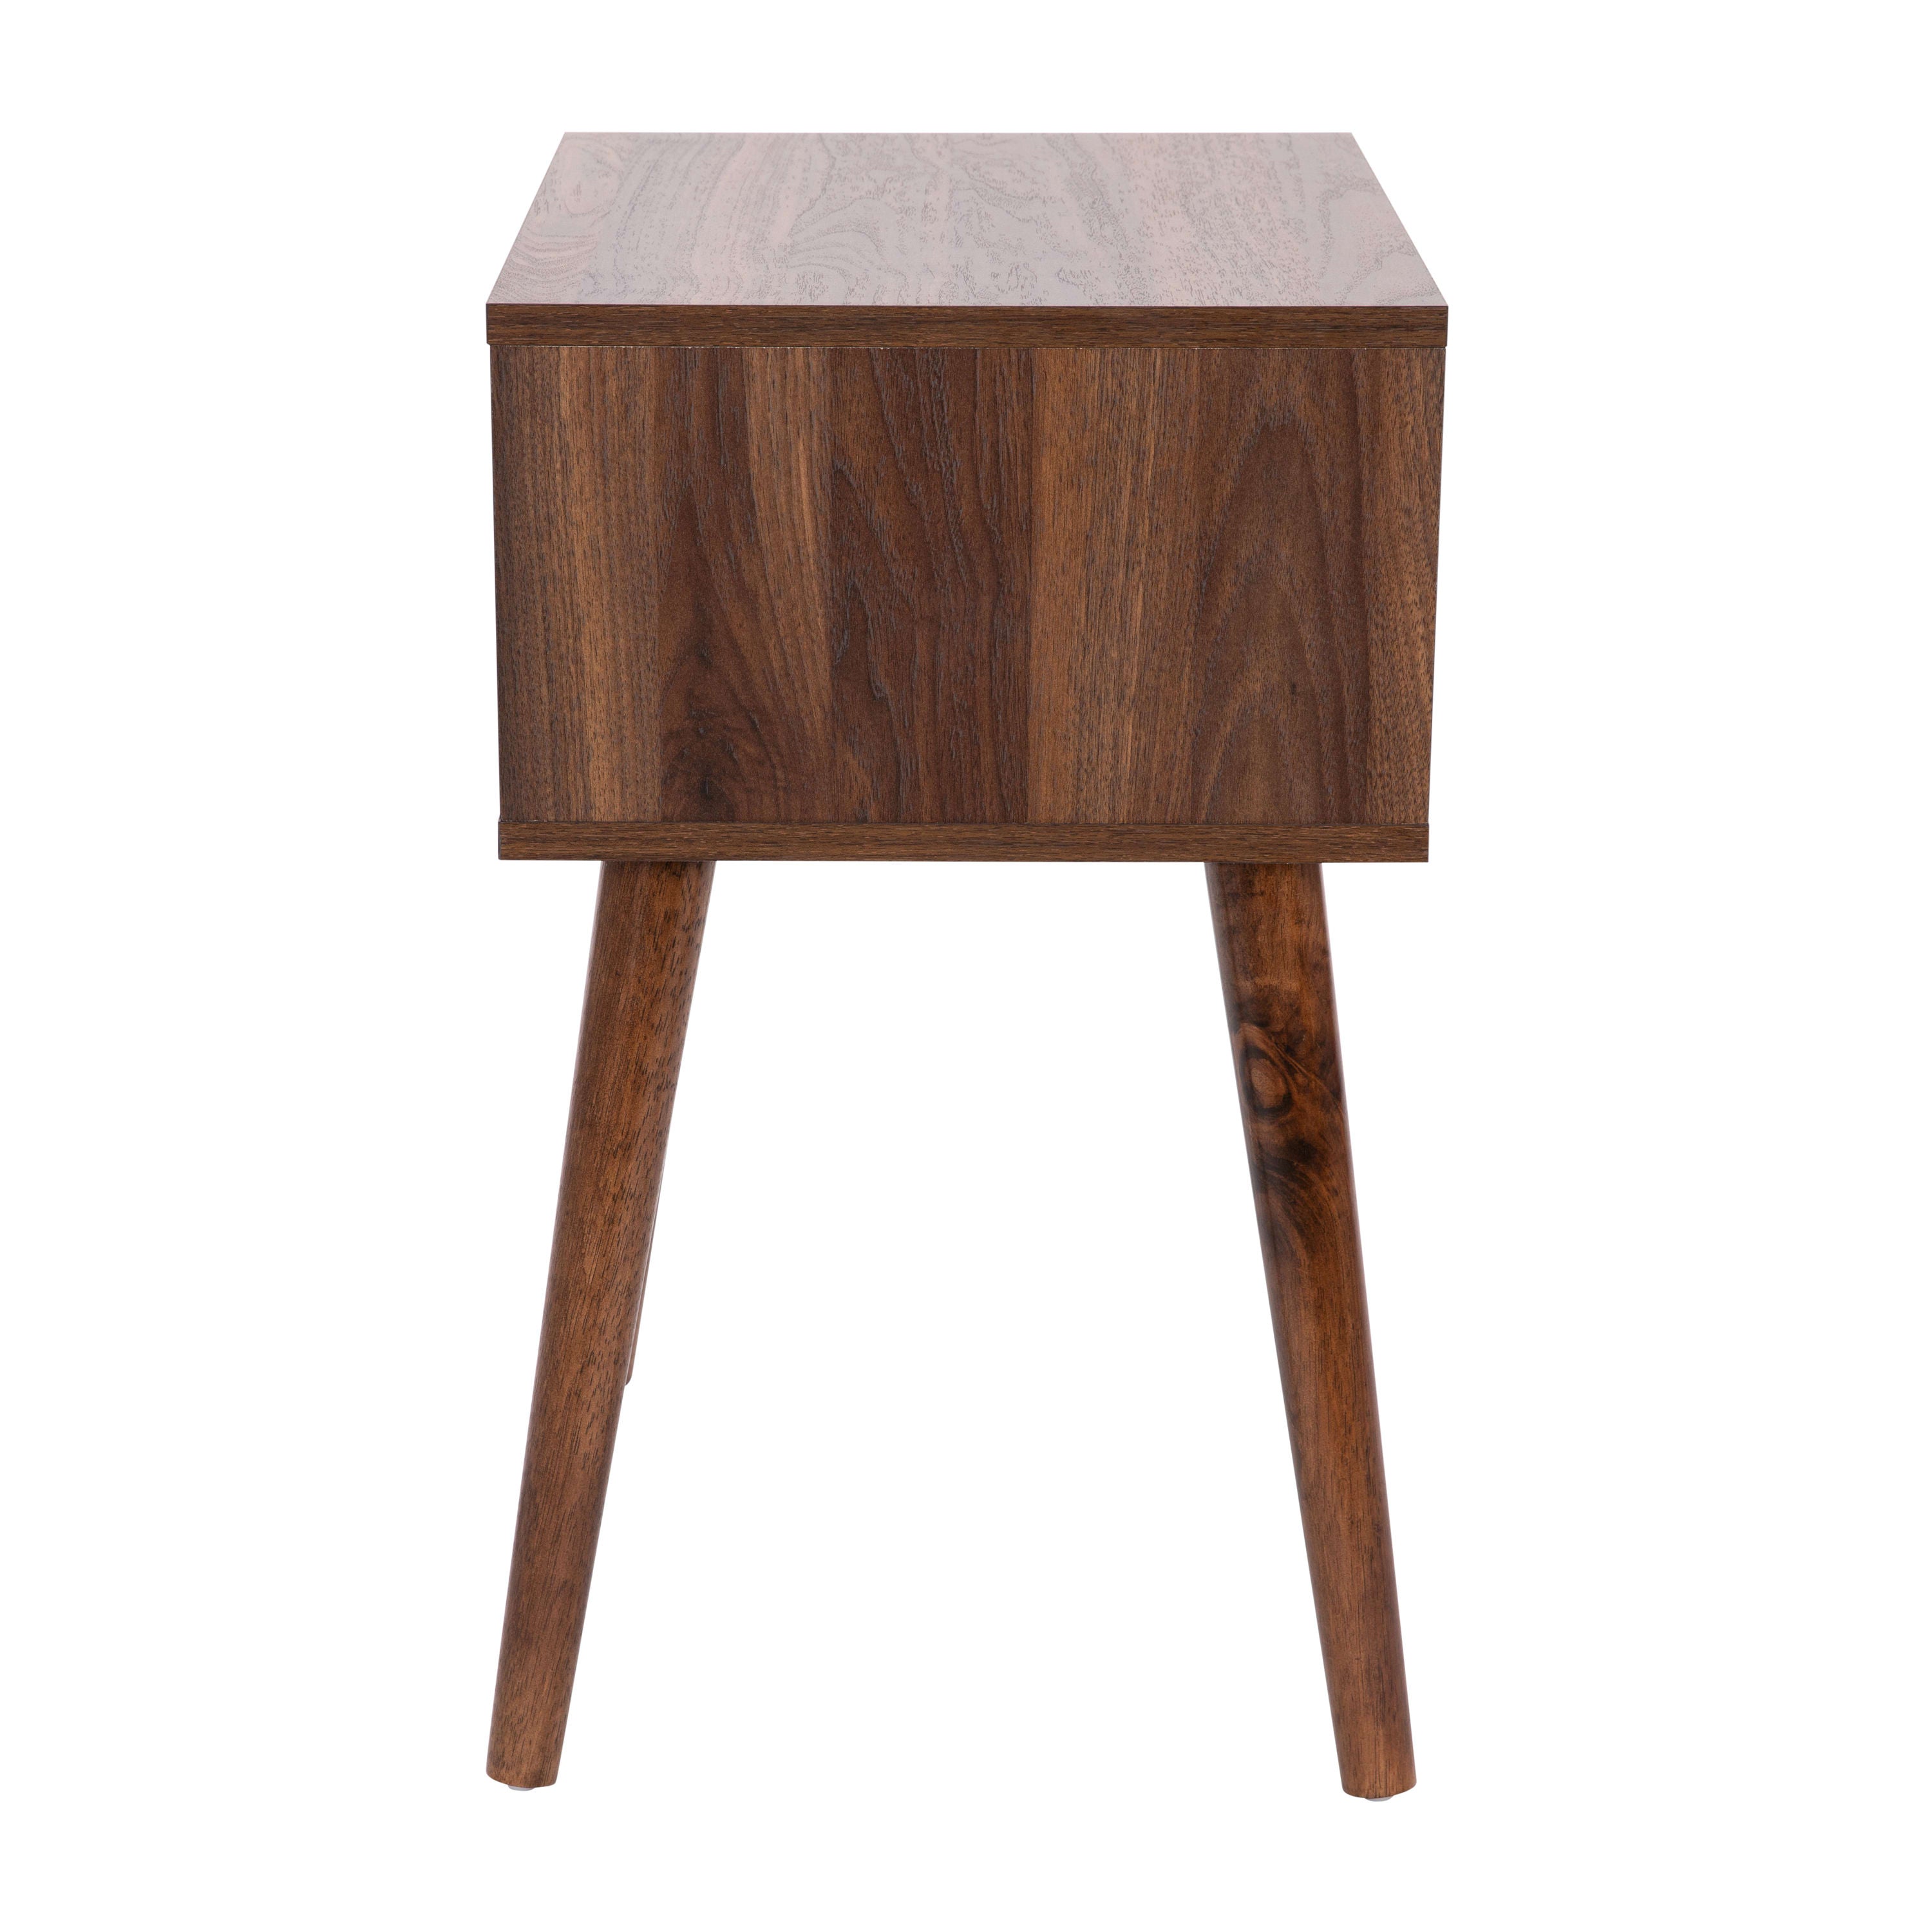 Hatfield Mid-Century Modern One Drawer Wood Nightstand, Side Accent or End  Table with Soft Close Storage Drawer